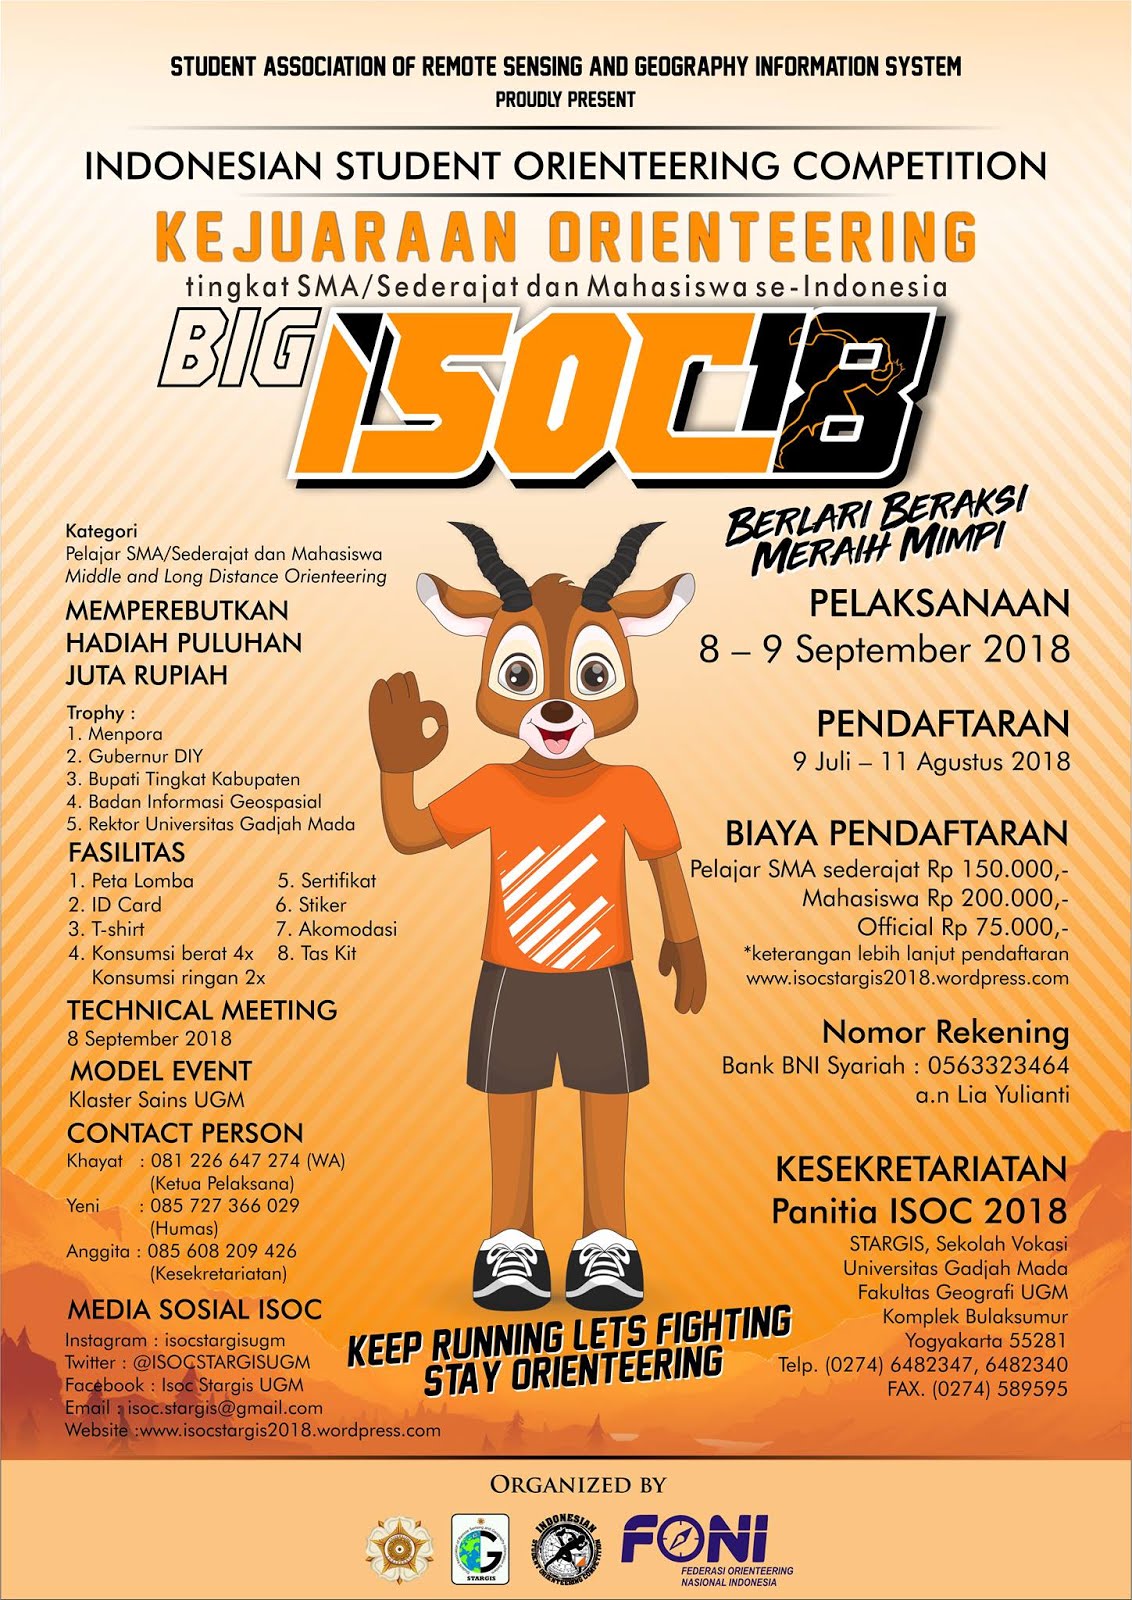 Indonesian Student Orienteering Competition / BIG ISOC â€¢ 2018